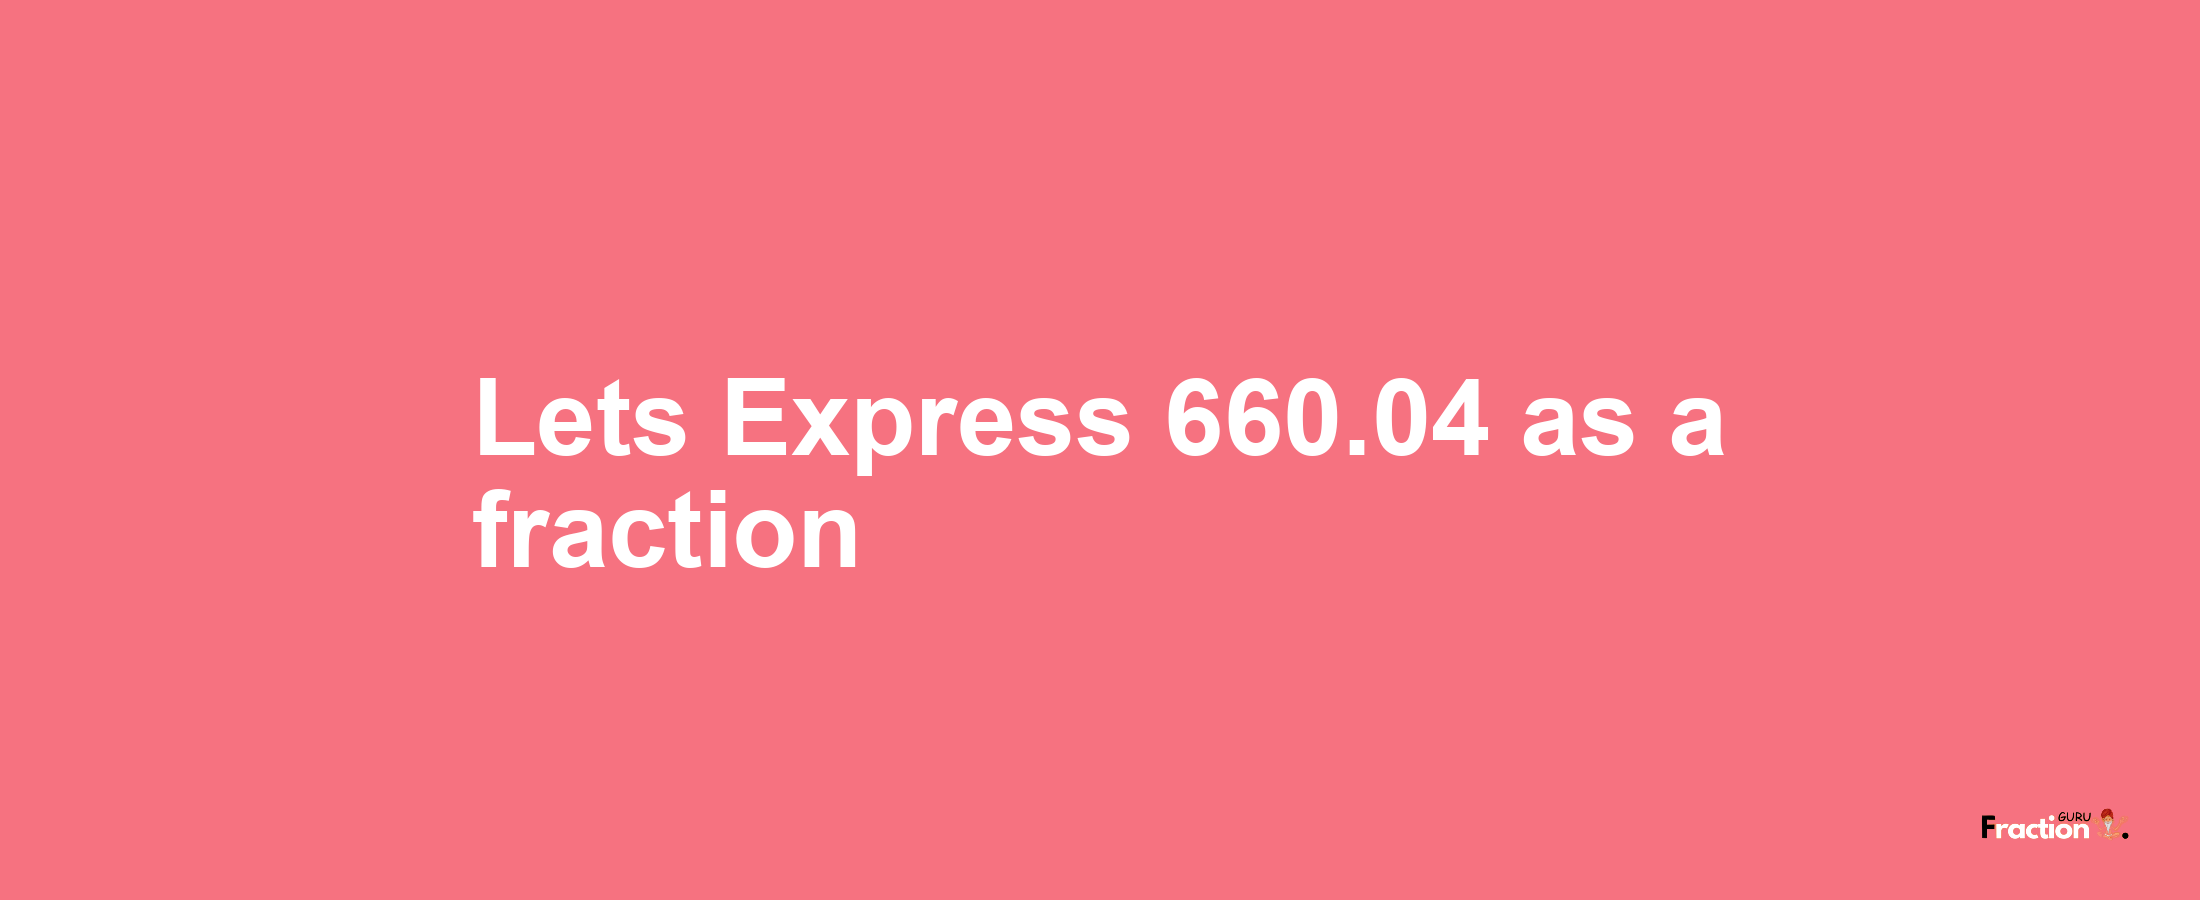 Lets Express 660.04 as afraction